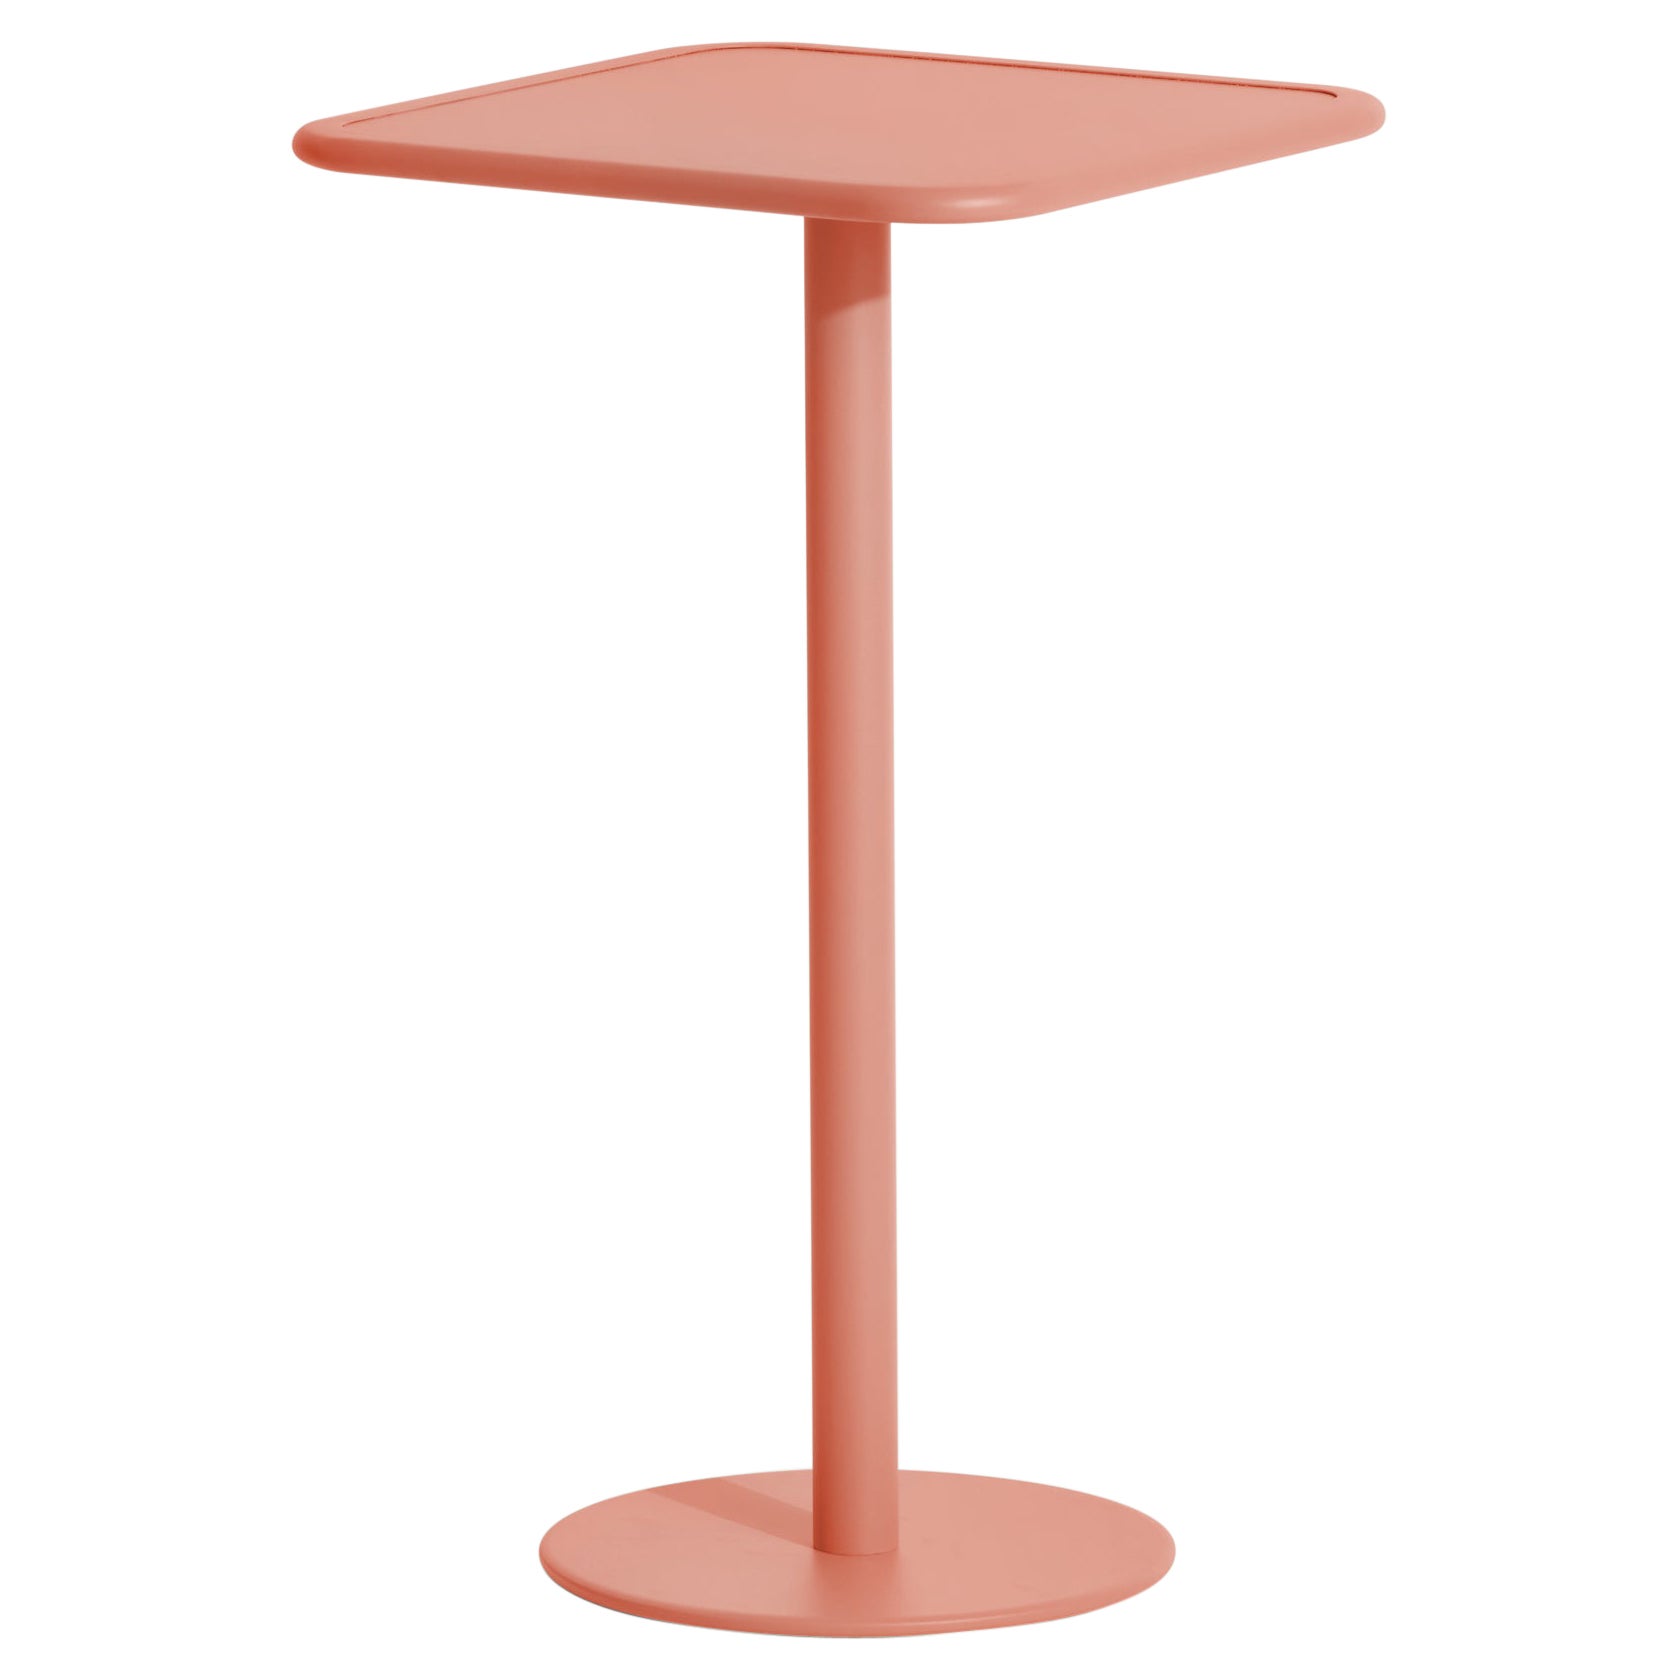 Petite Friture Week-End Square High Table in Coral Aluminium, 2017 For Sale